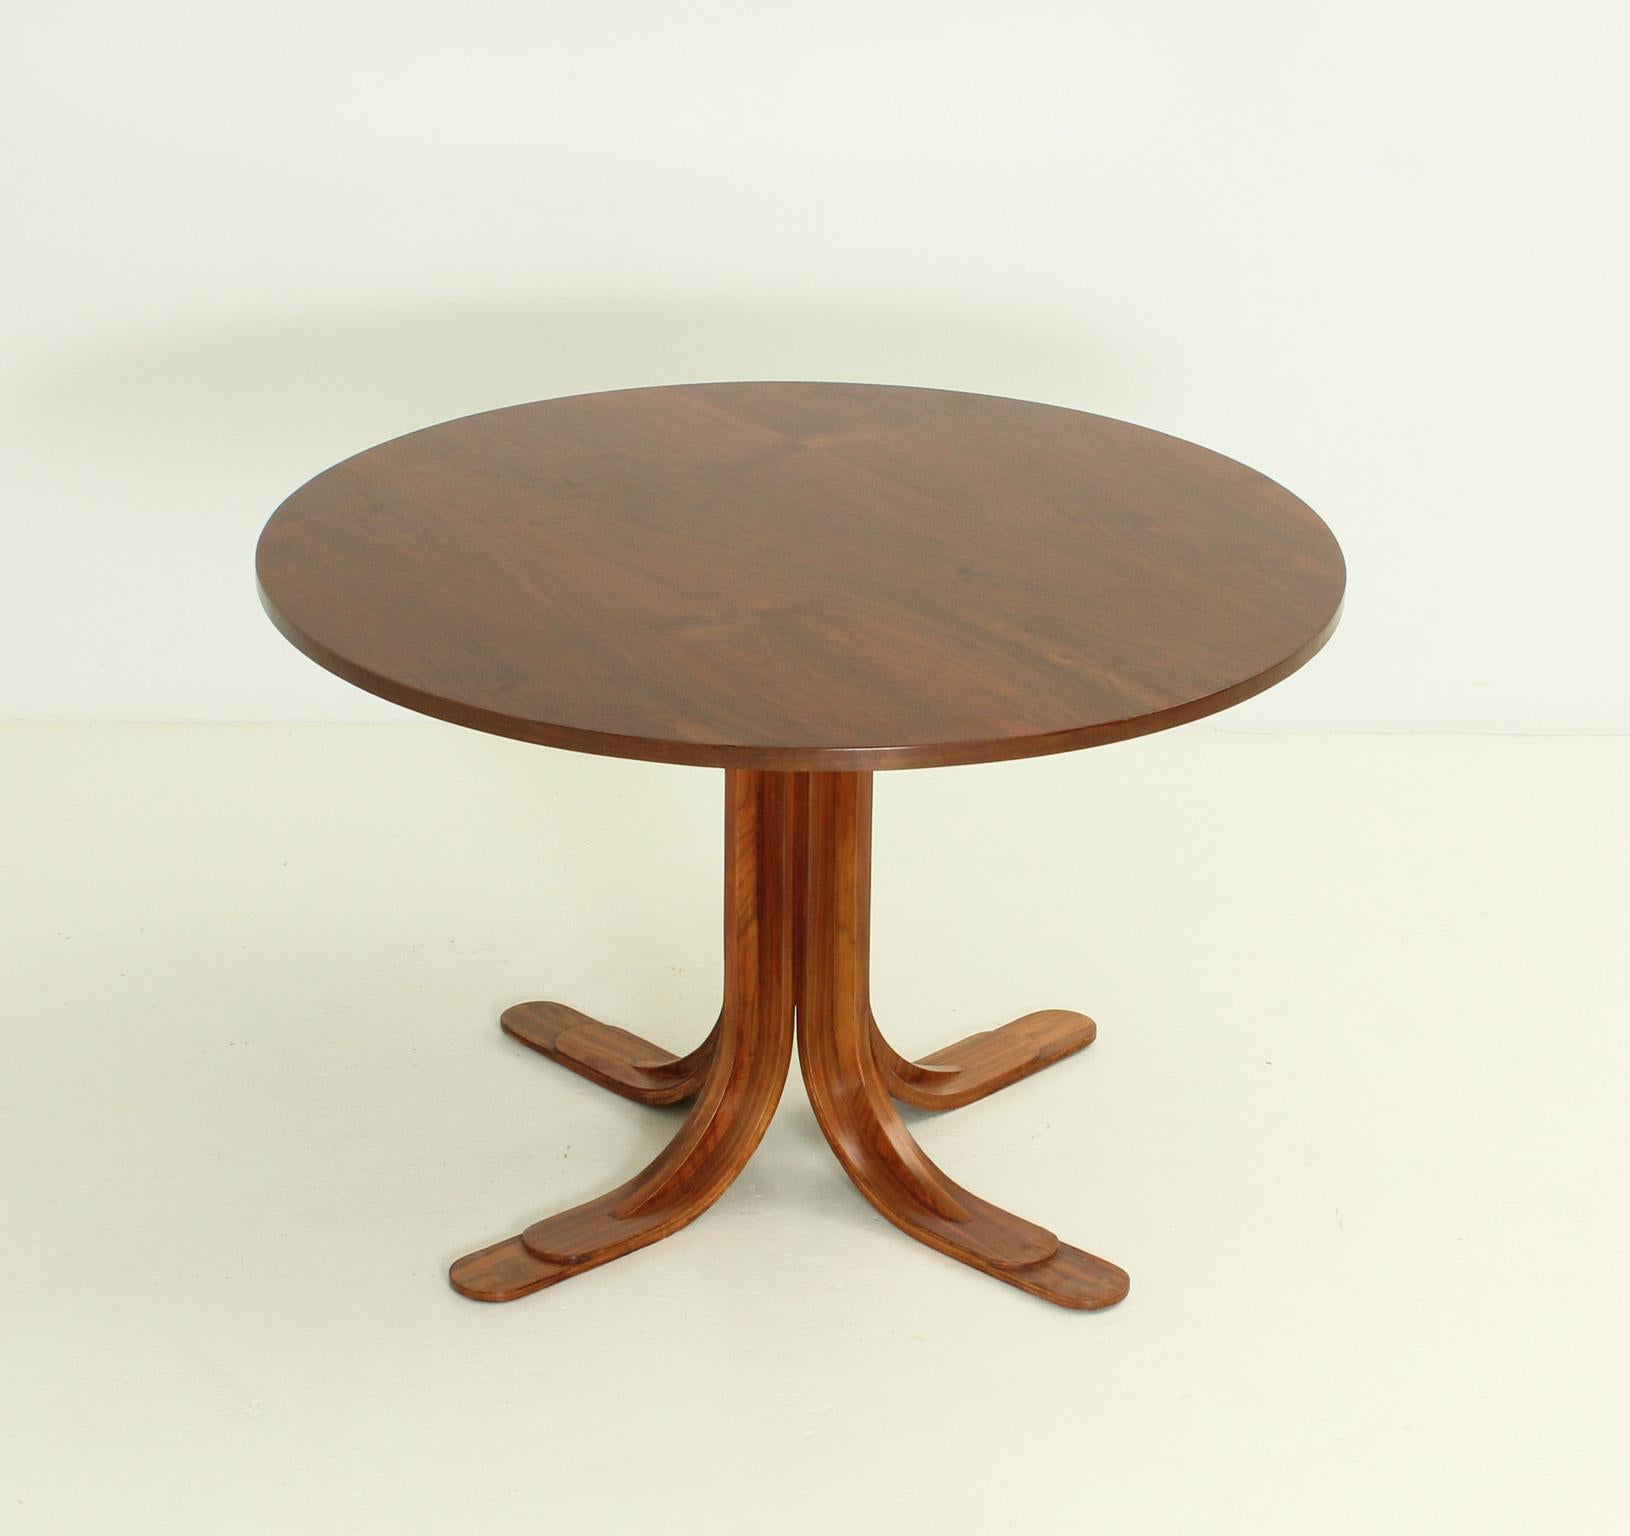 Dining table produced by Cabos, Spain in late 1960's. Walnut veneered wood.